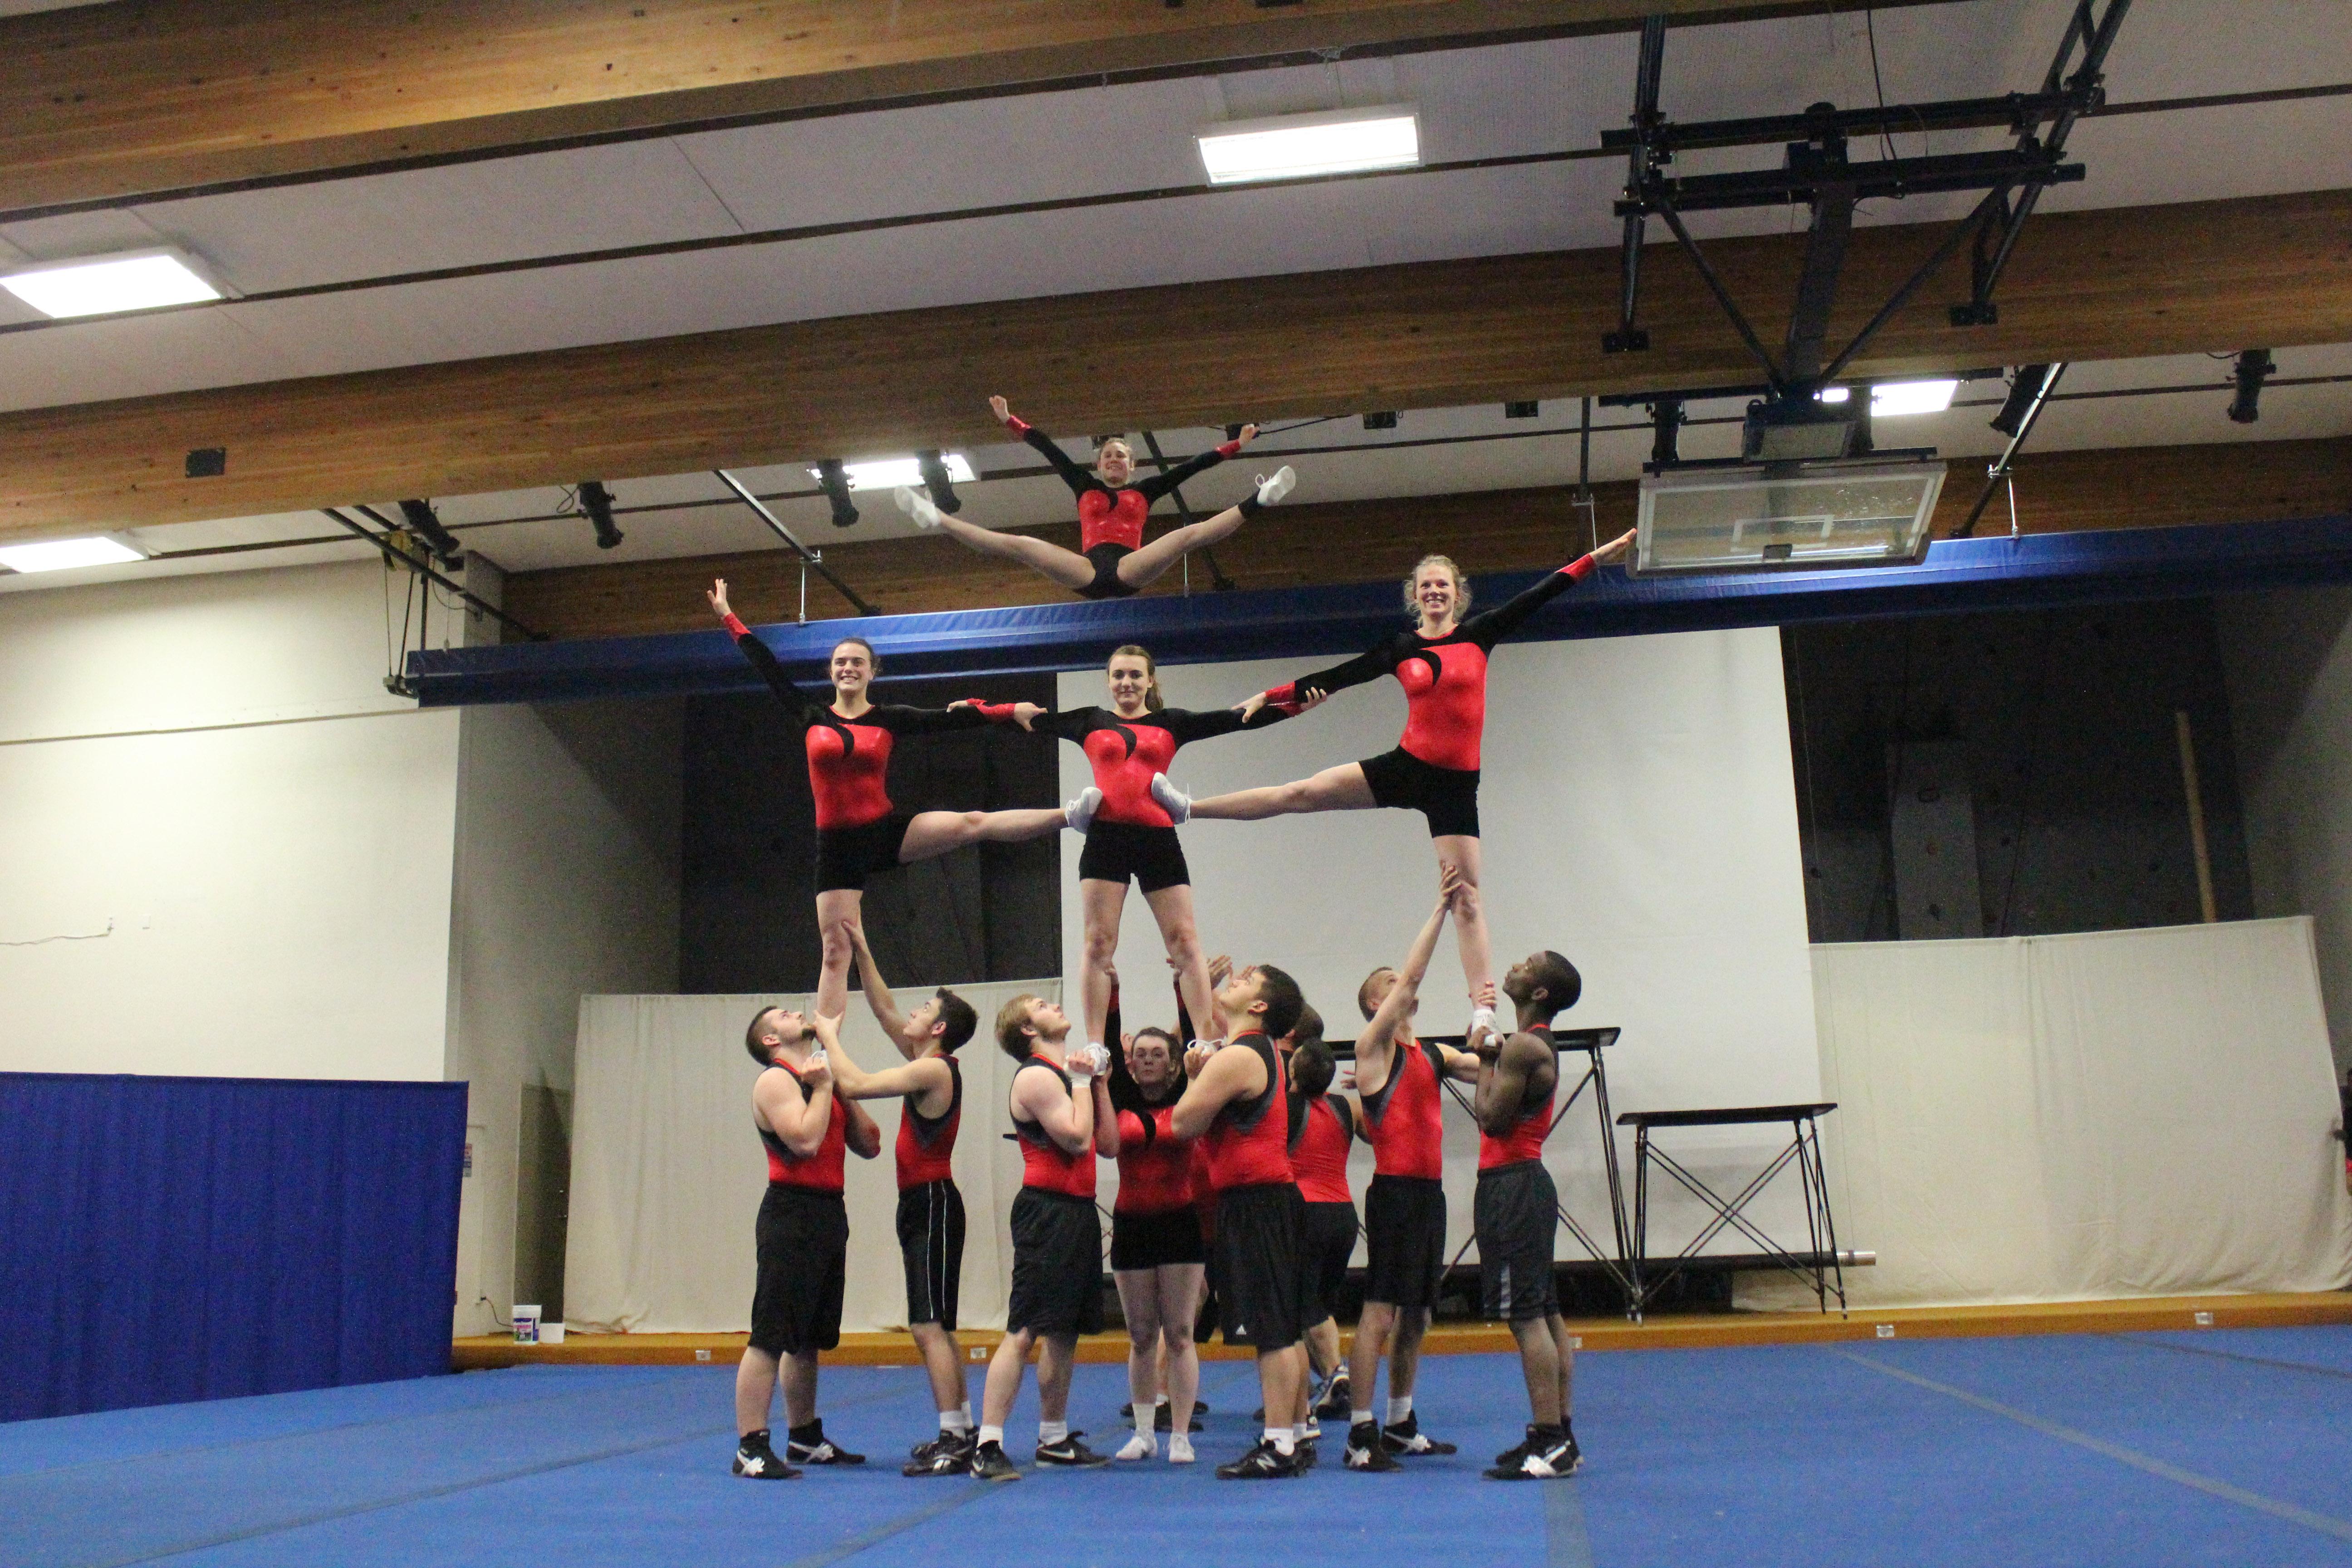 TEAMWORK- The Acronaires team from Canadian University College show off their tricks during an evening practice at their local fitness centre on campus.